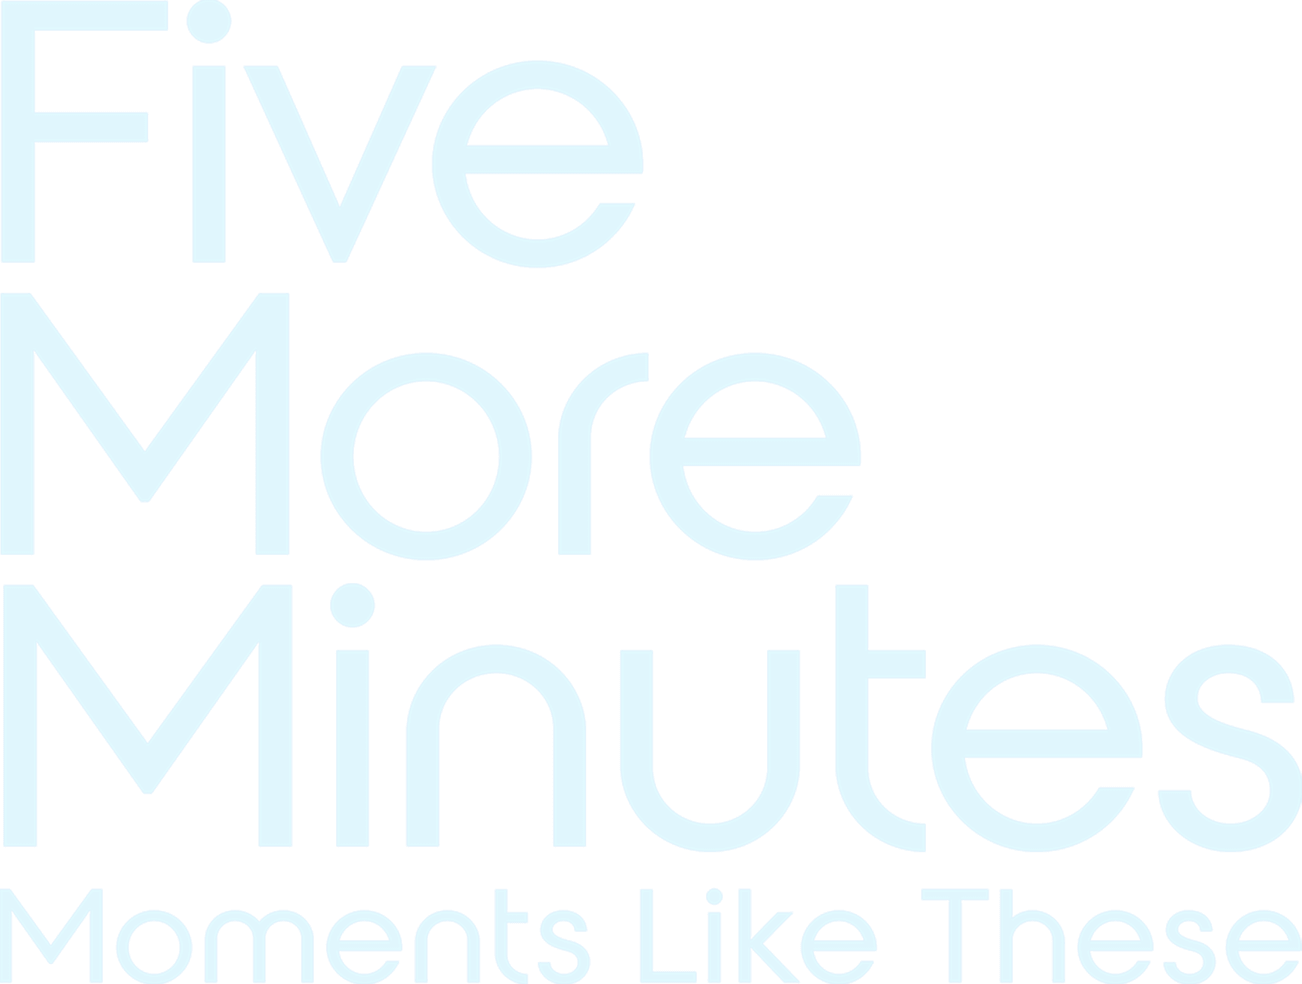 Five More Minutes: Moments Like These logo